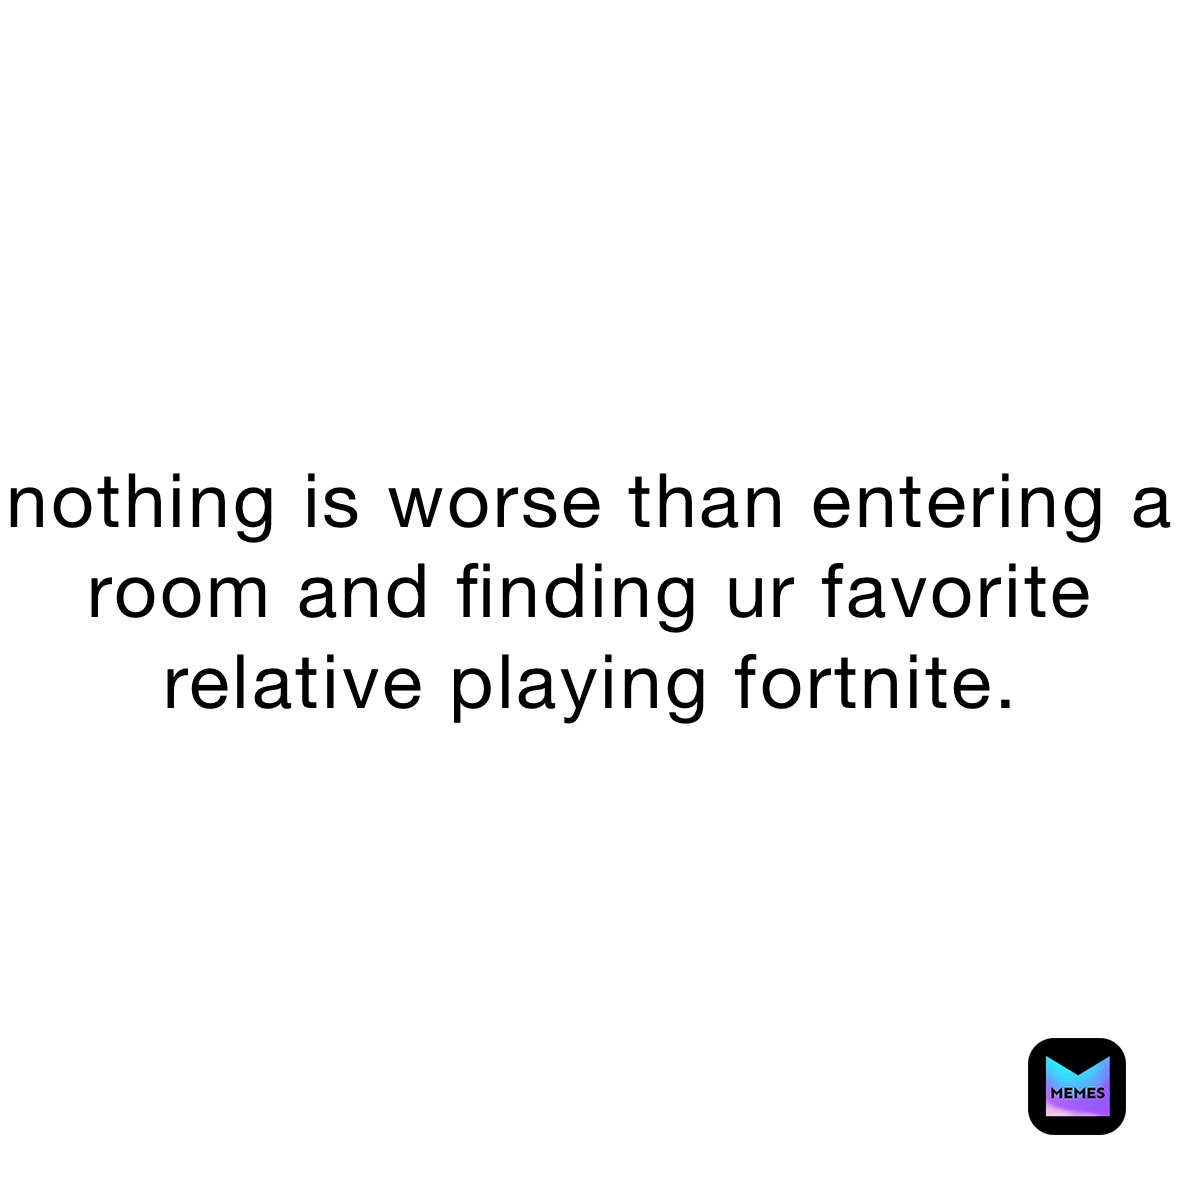 nothing is worse than entering a room and finding ur favorite relative playing fortnite.